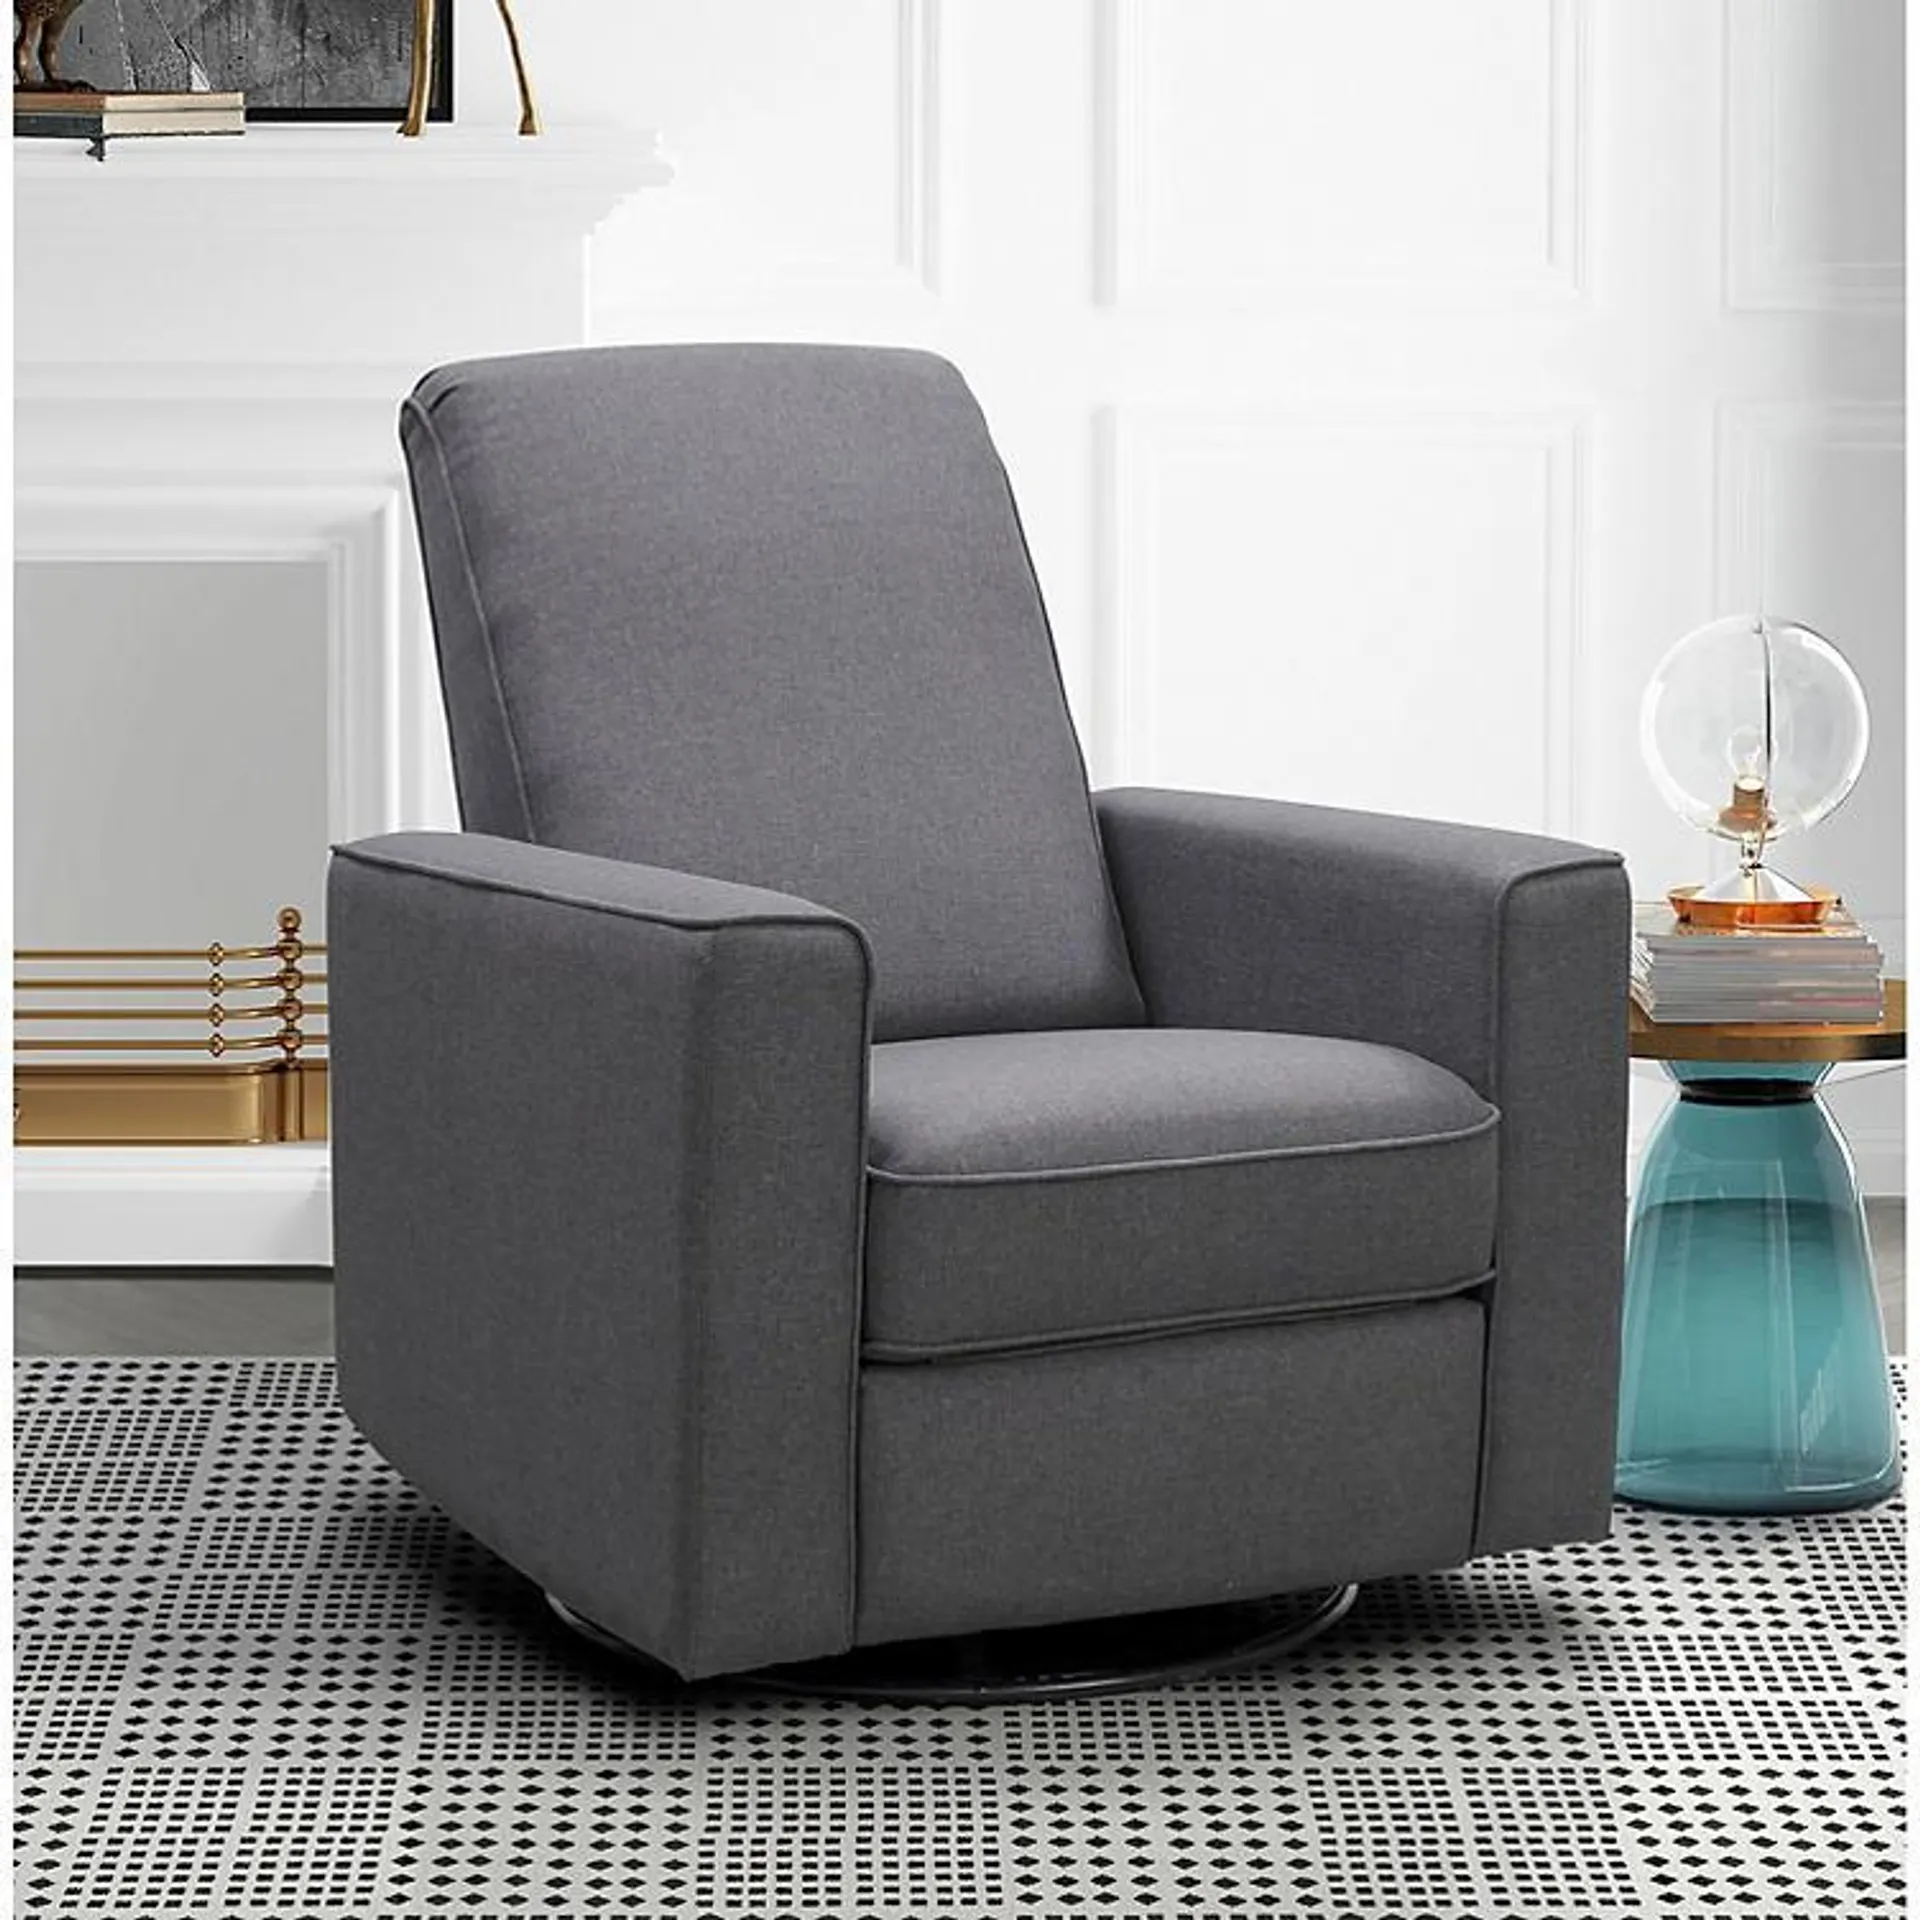 Langley Swivel Glider Recliner, Assorted Colors